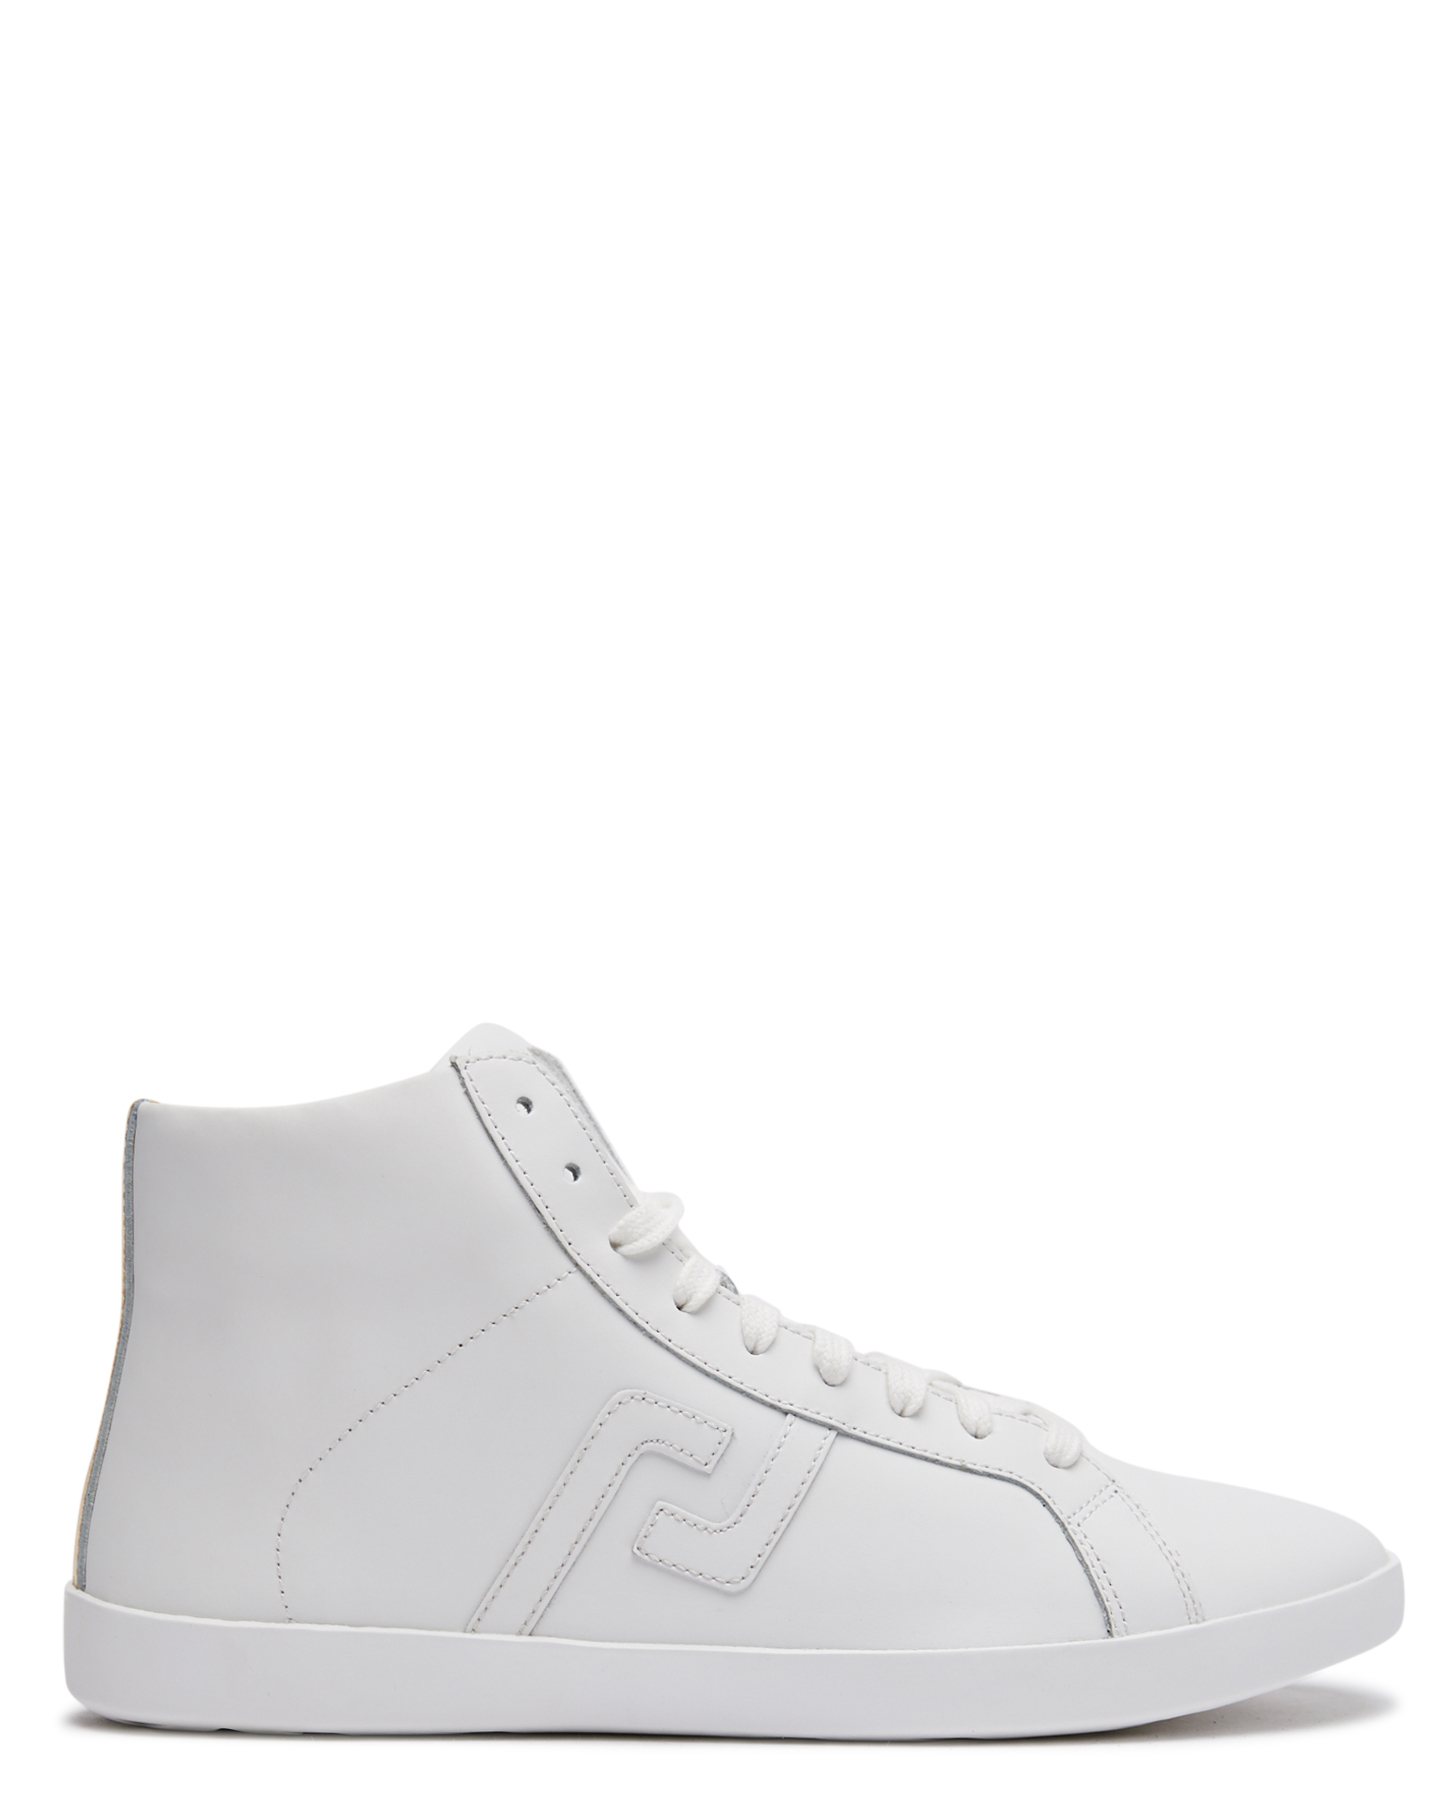 Rollie Womens Prime Ht Shoe - White Gold | SurfStitch